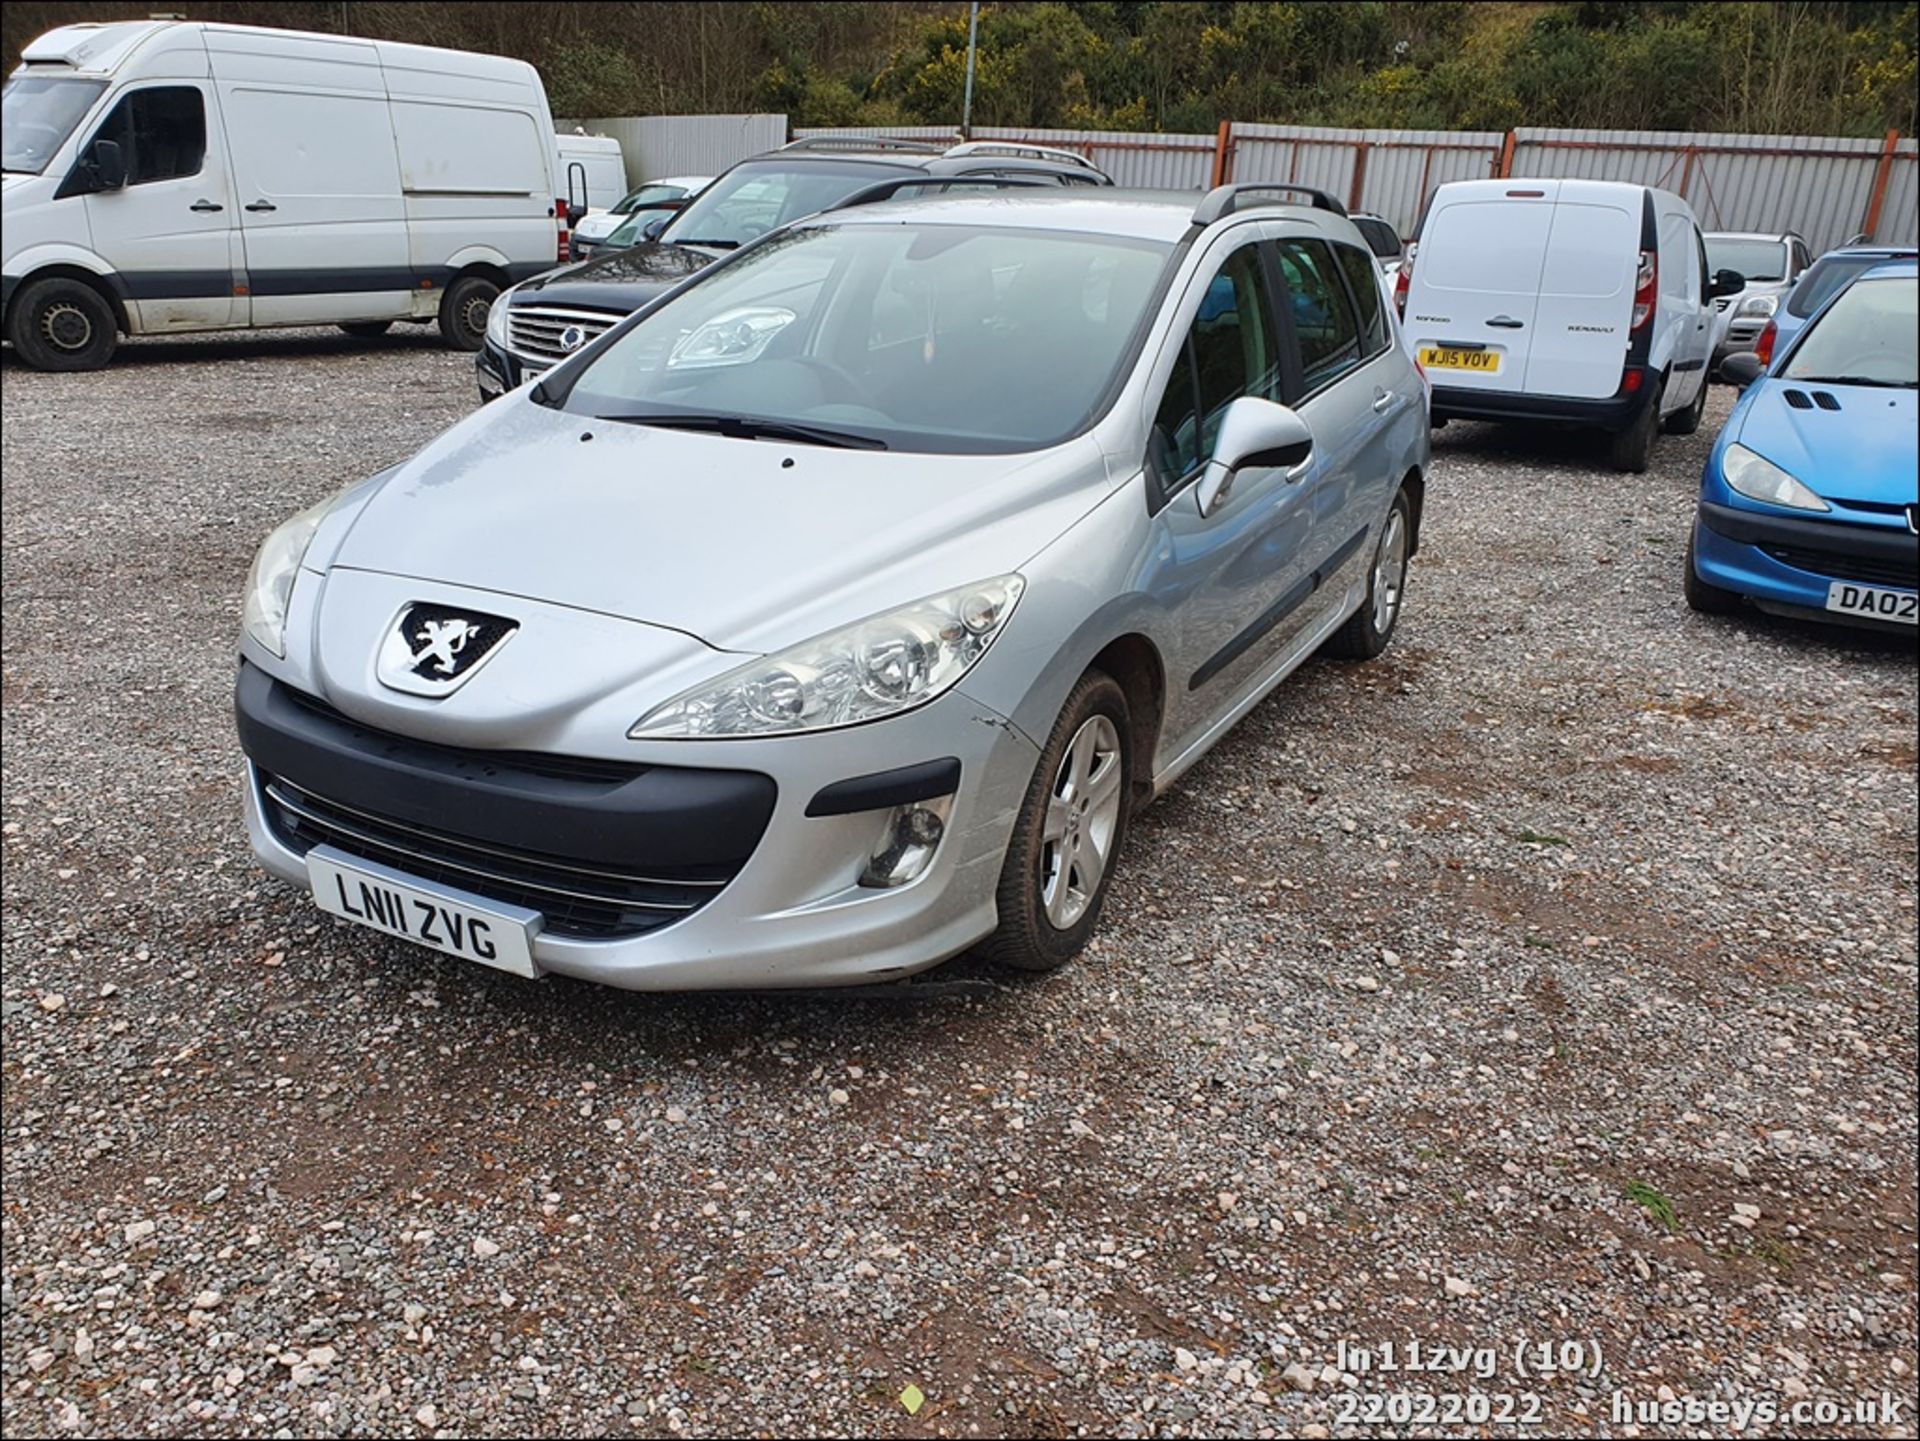 11/11 PEUGEOT 308 S SW HDI 92 - 1560cc 5dr Estate (Silver, 115k) - Image 11 of 46